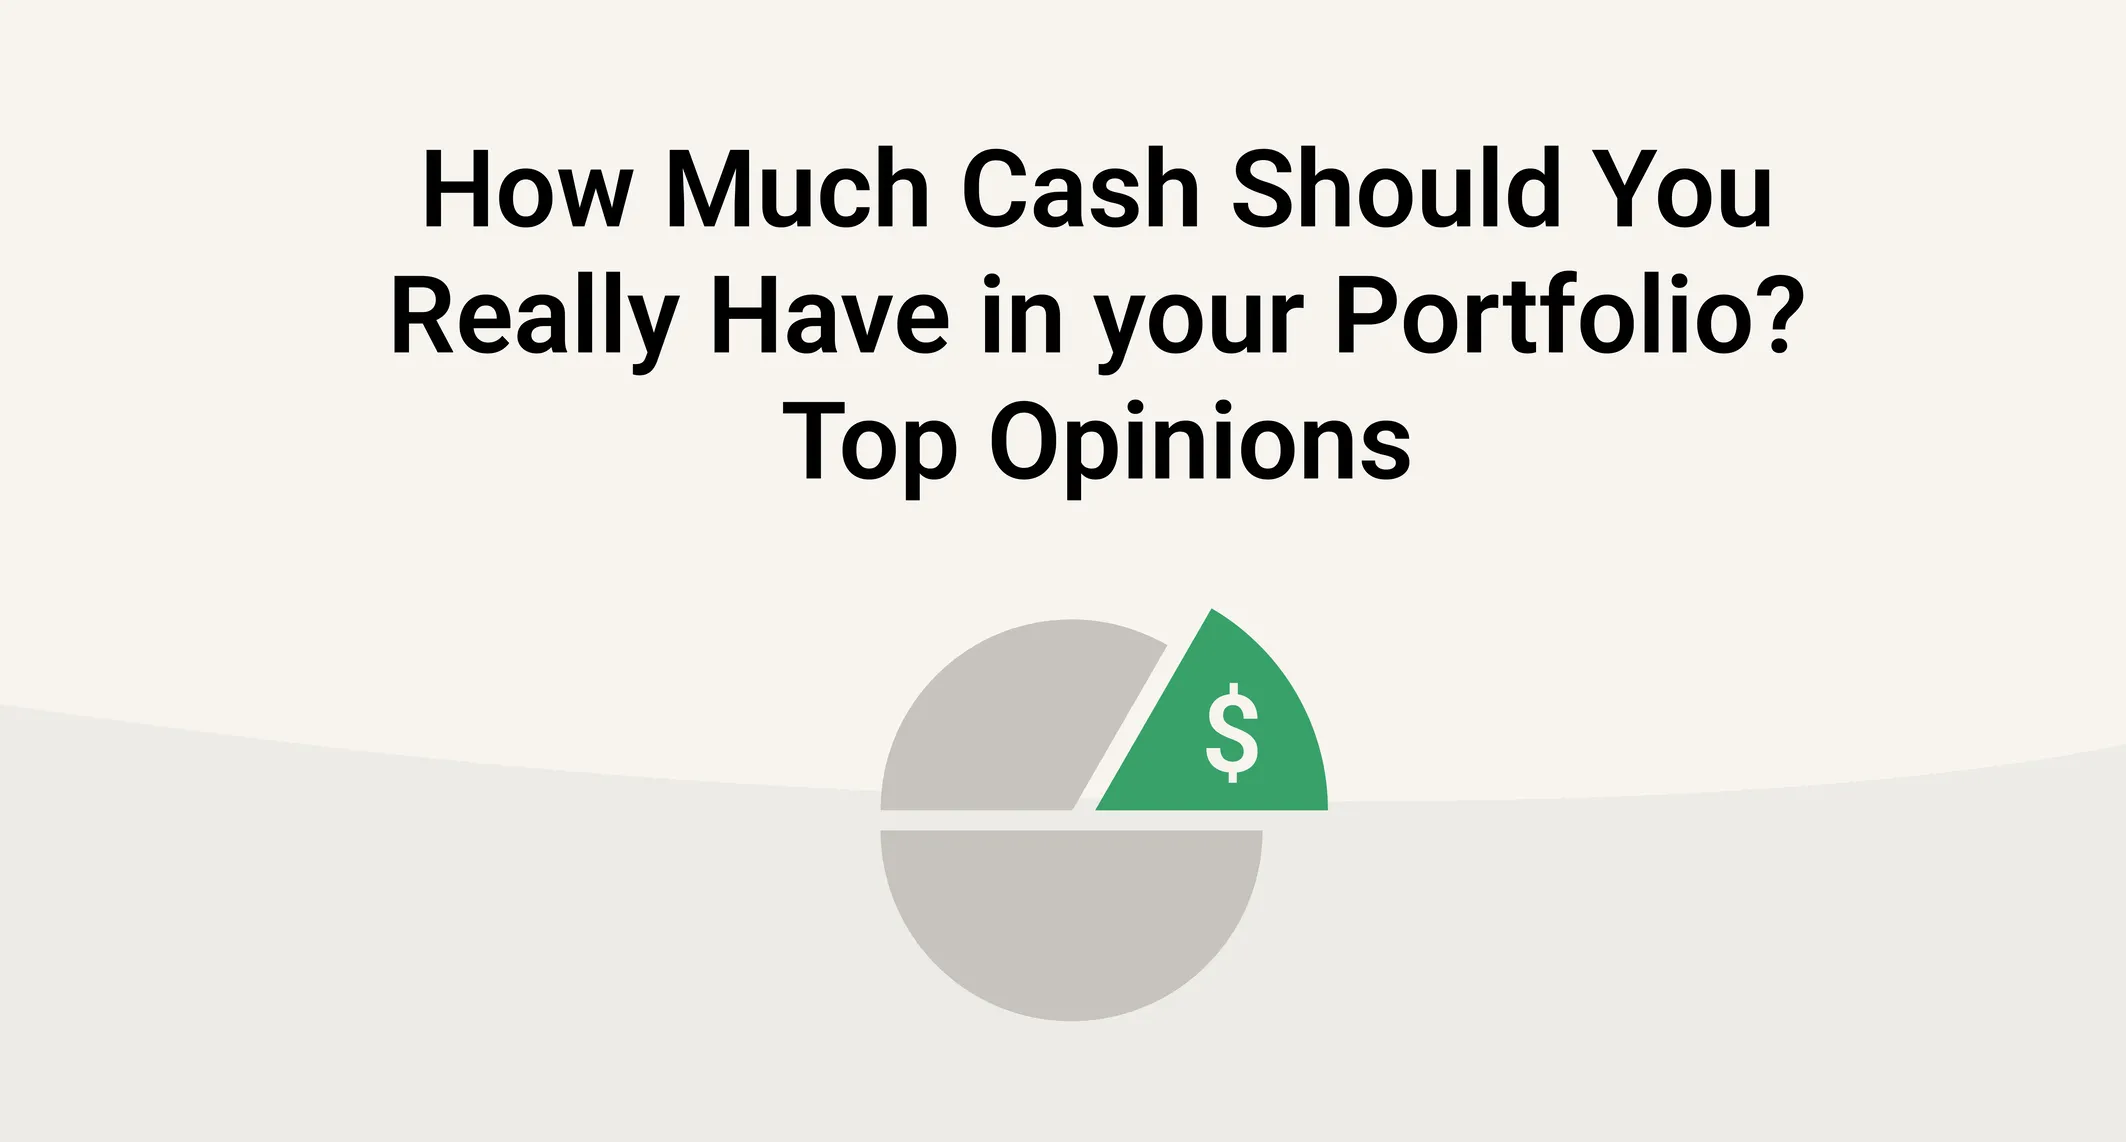 How Much Cash Should You Really Have in your Portfolio? Top Opinions